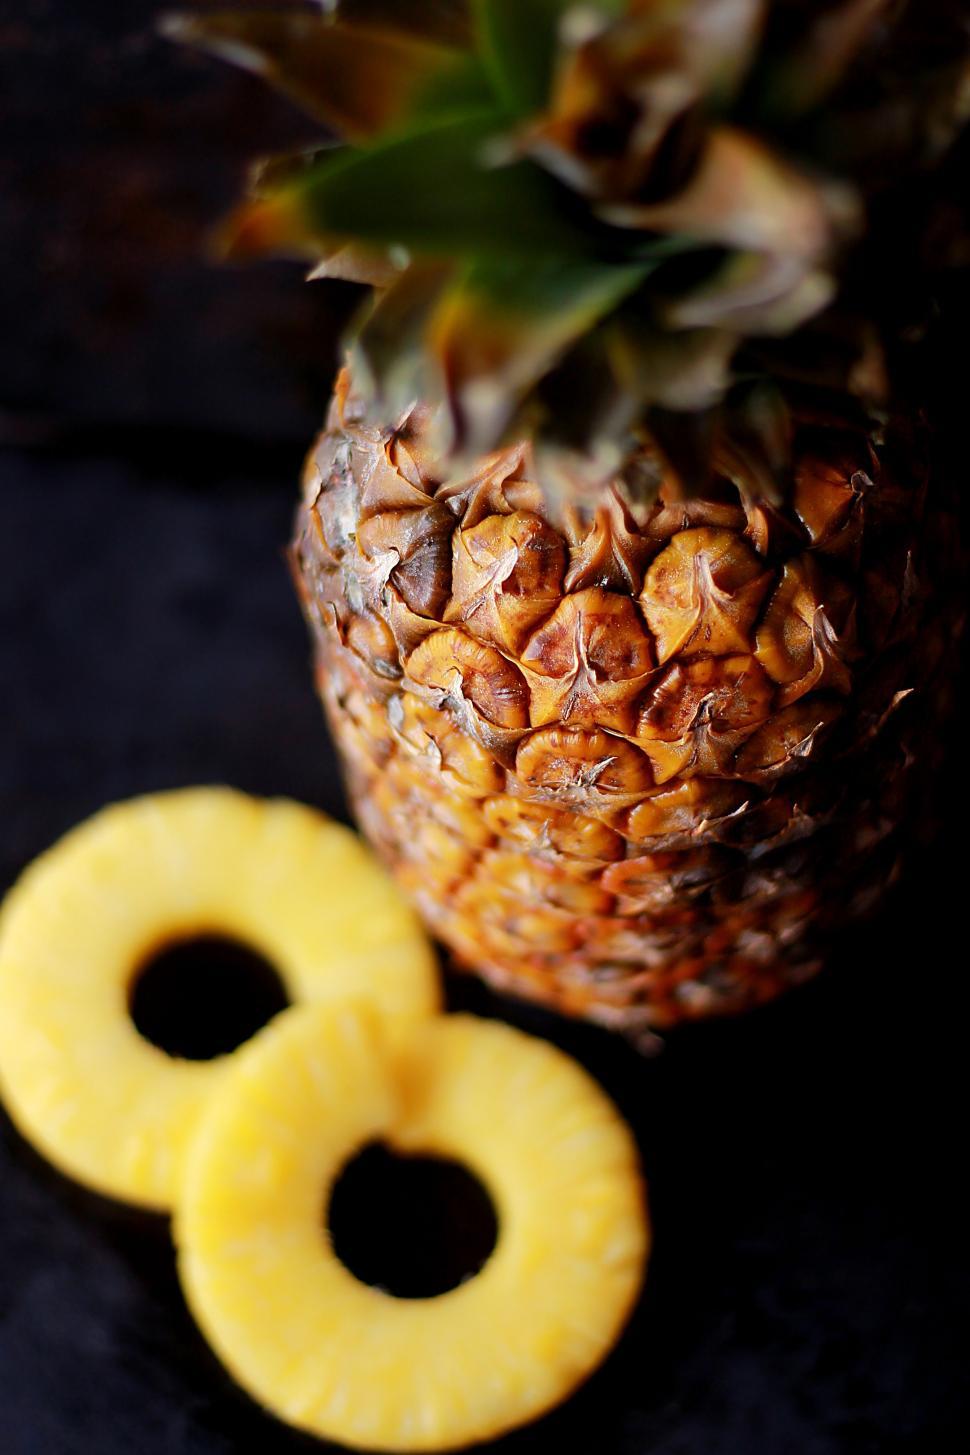 Free Image of Pineapple and Two Slices on Table 